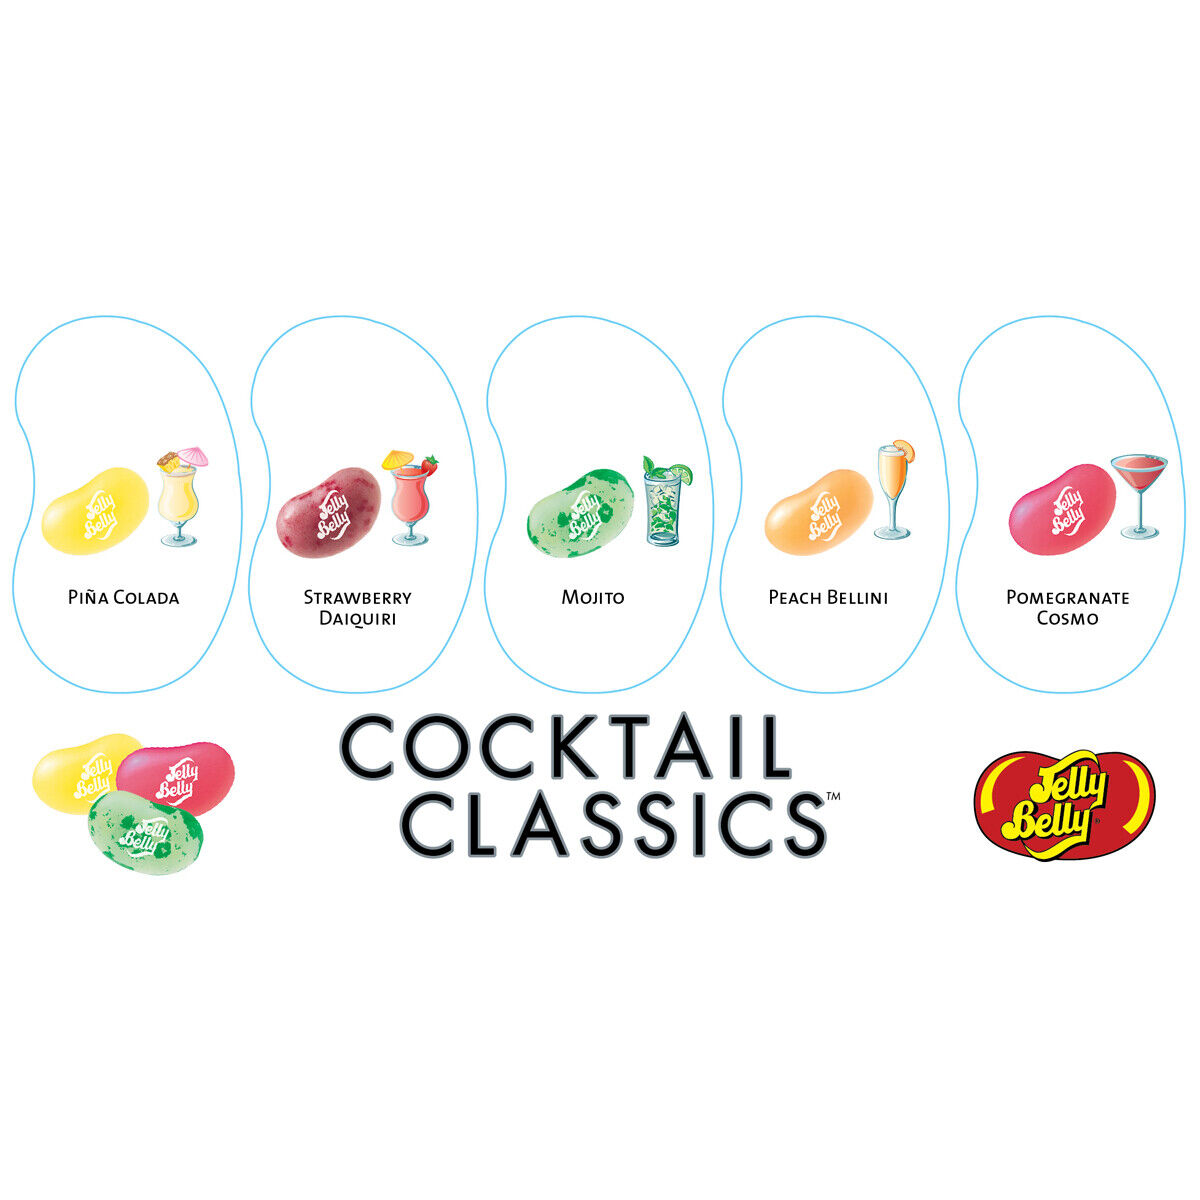 Cocktail Classics Jelly Beans Bag